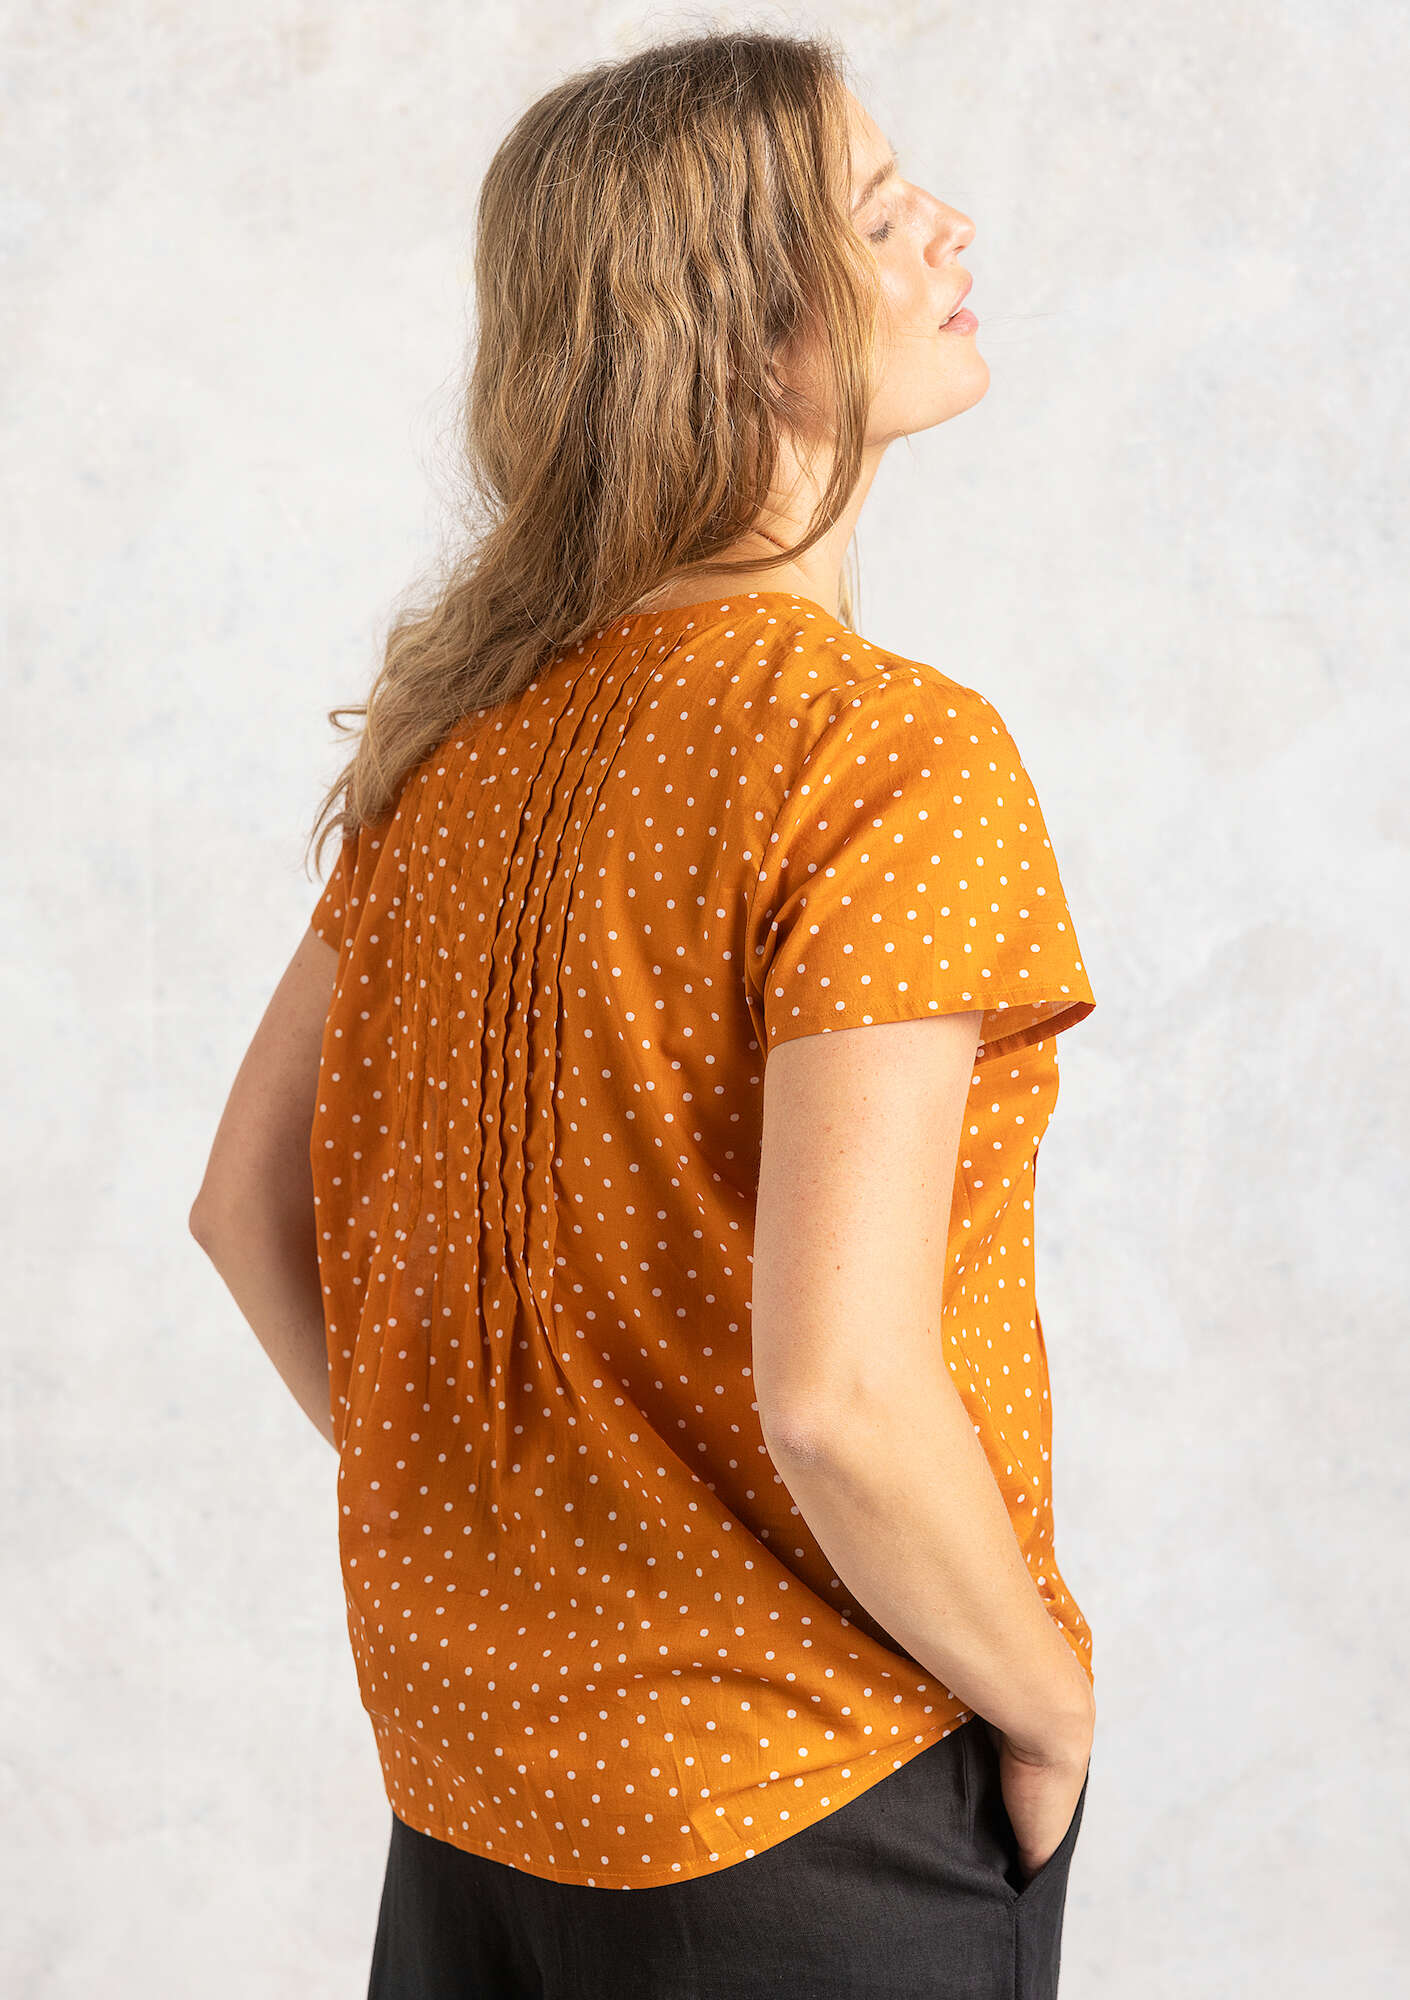 Short-sleeve “Pytte” blouse in organic cotton amber/patterned